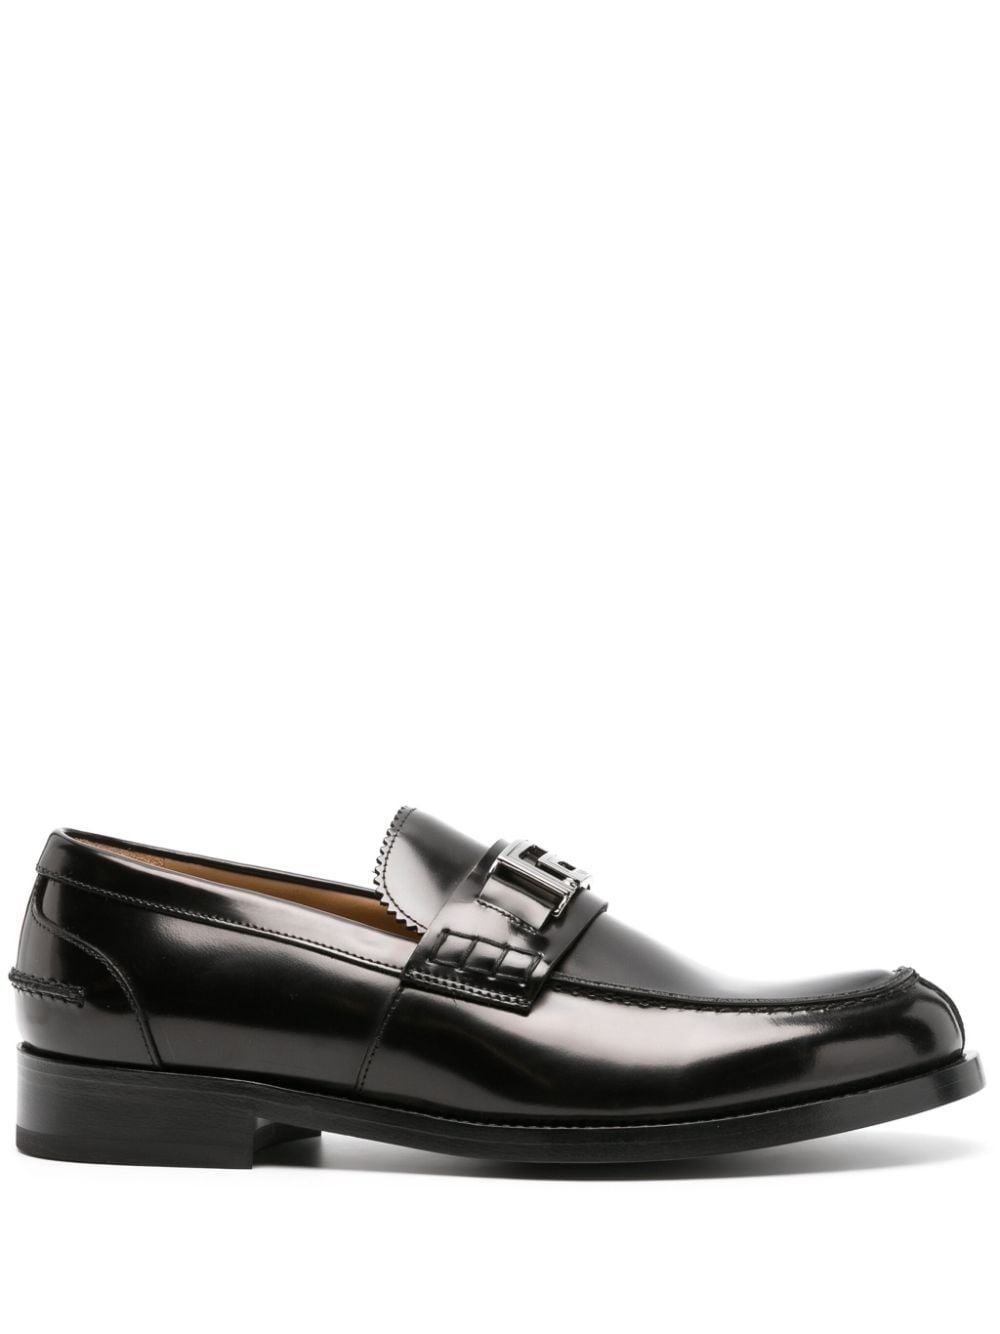 Greca patent leather loafers - 1